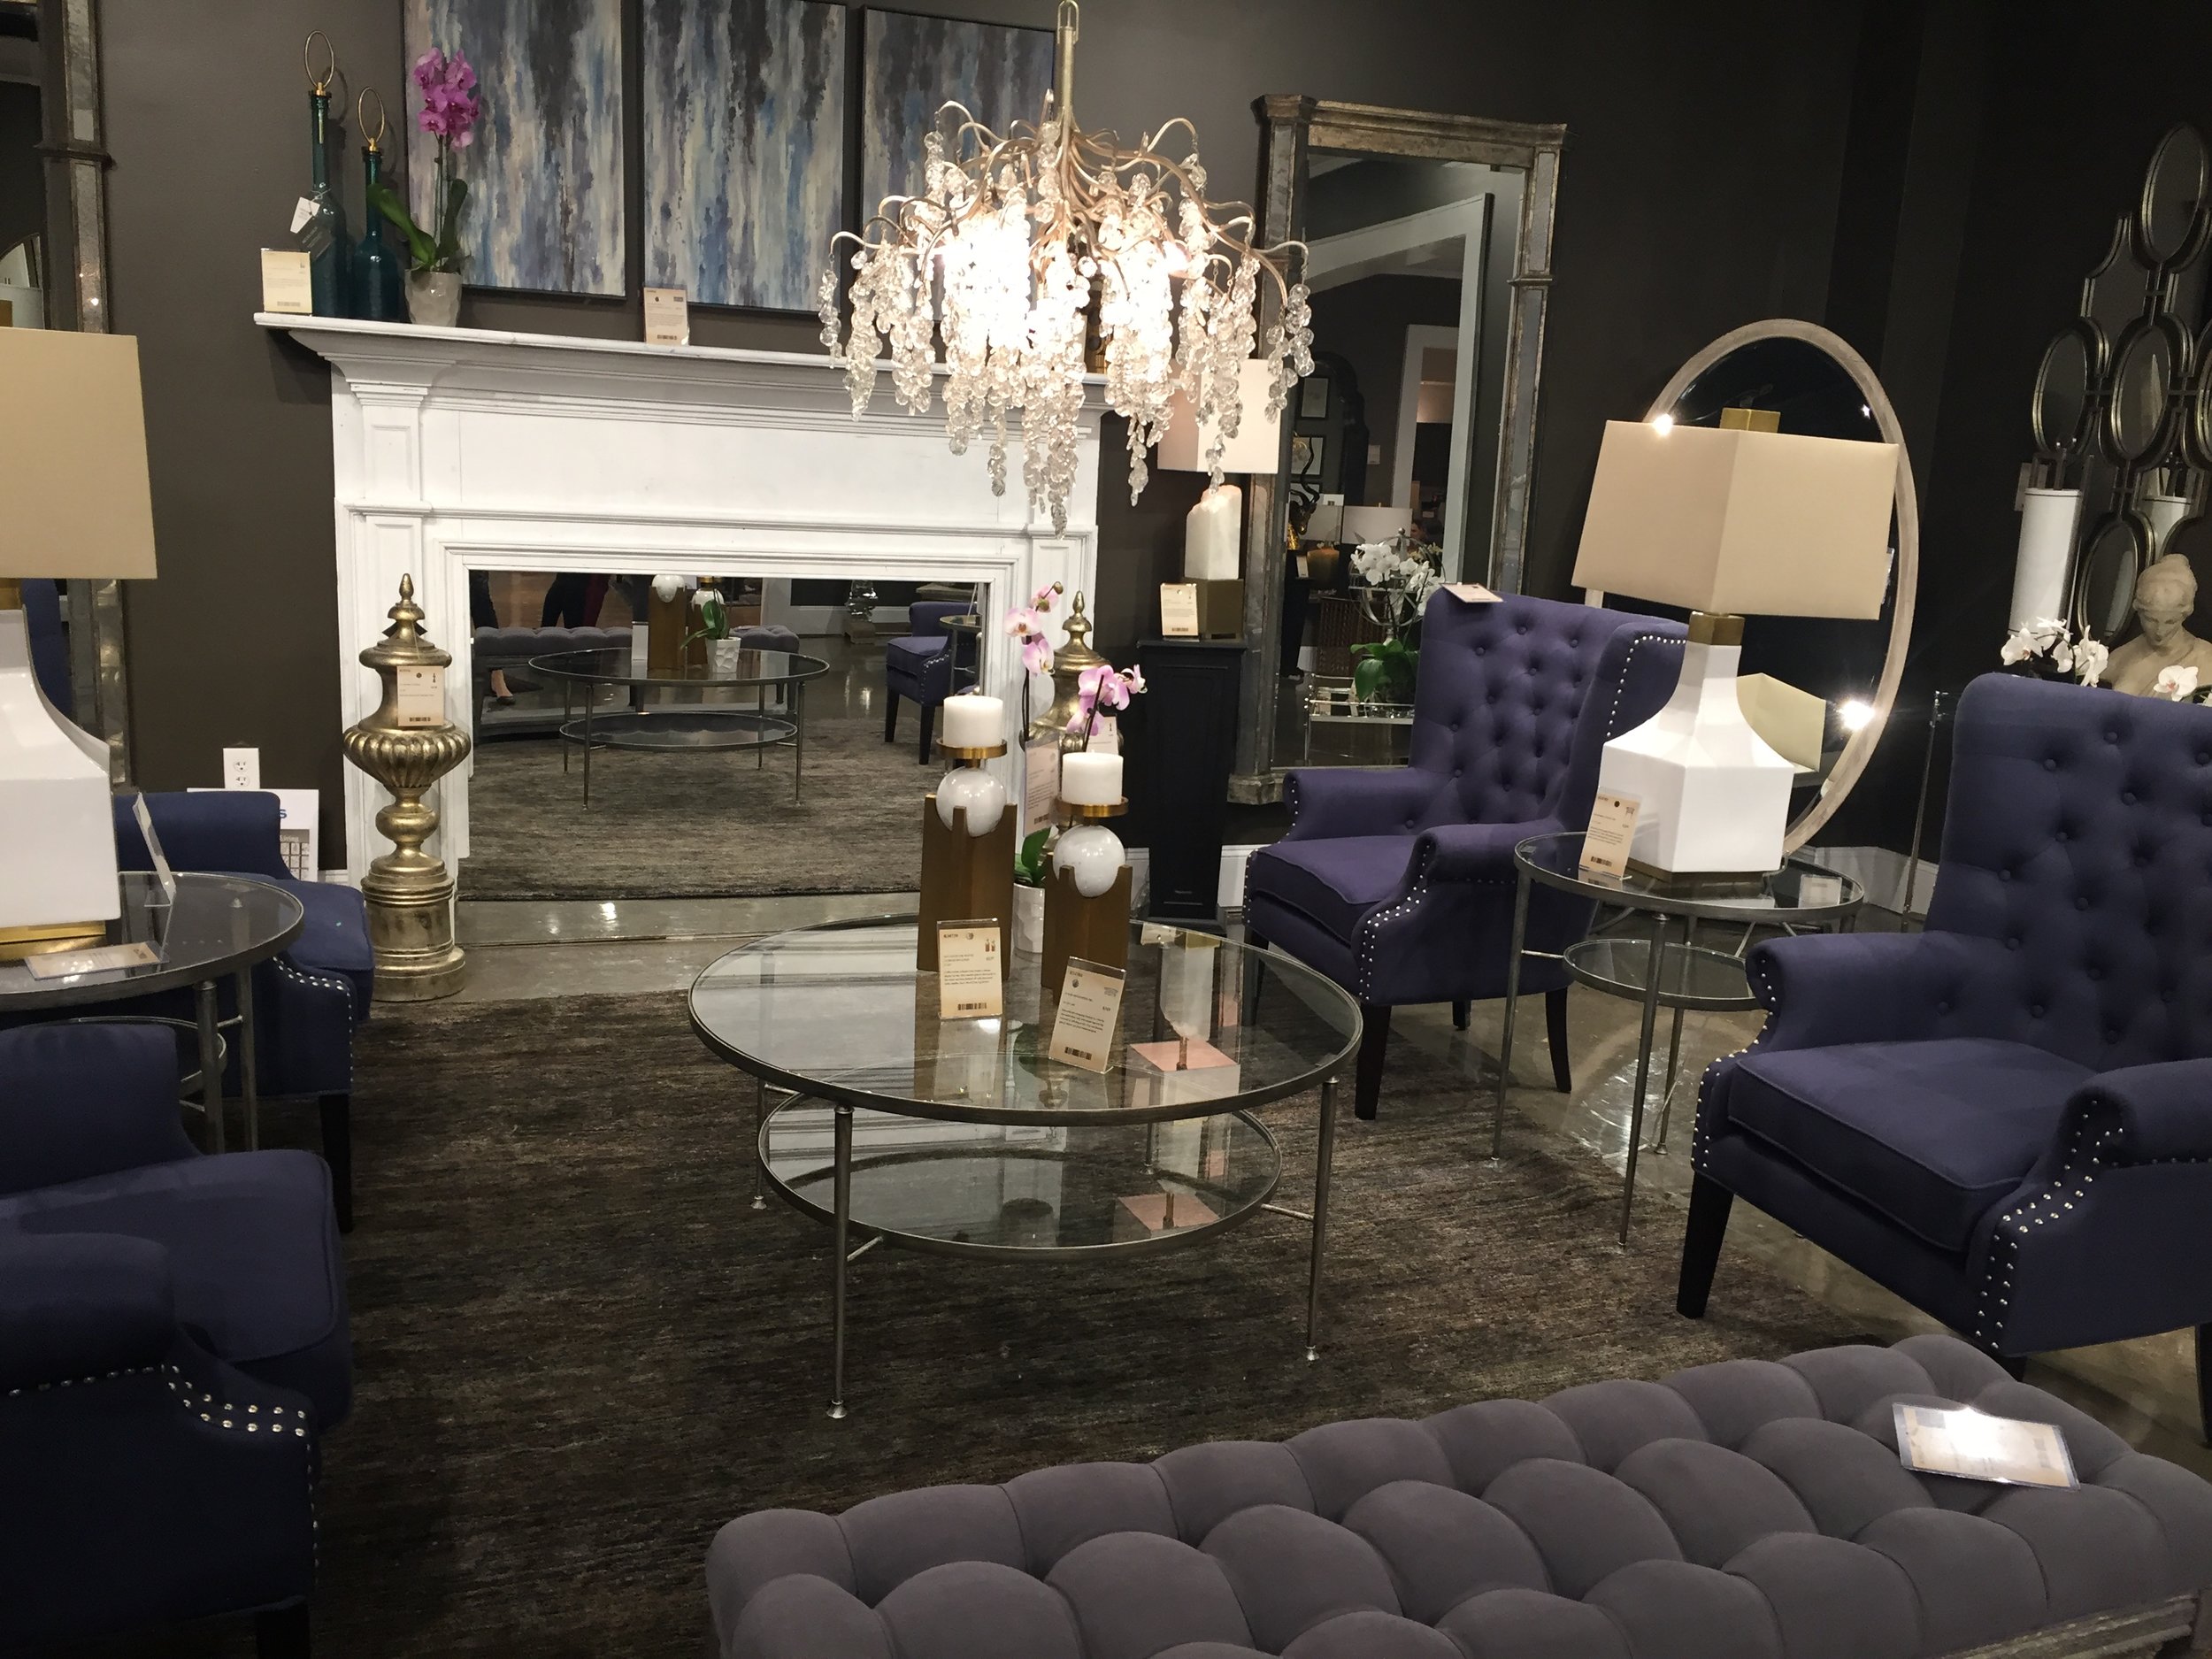 Deep, stormy, moody blues and grays from Uttermost.